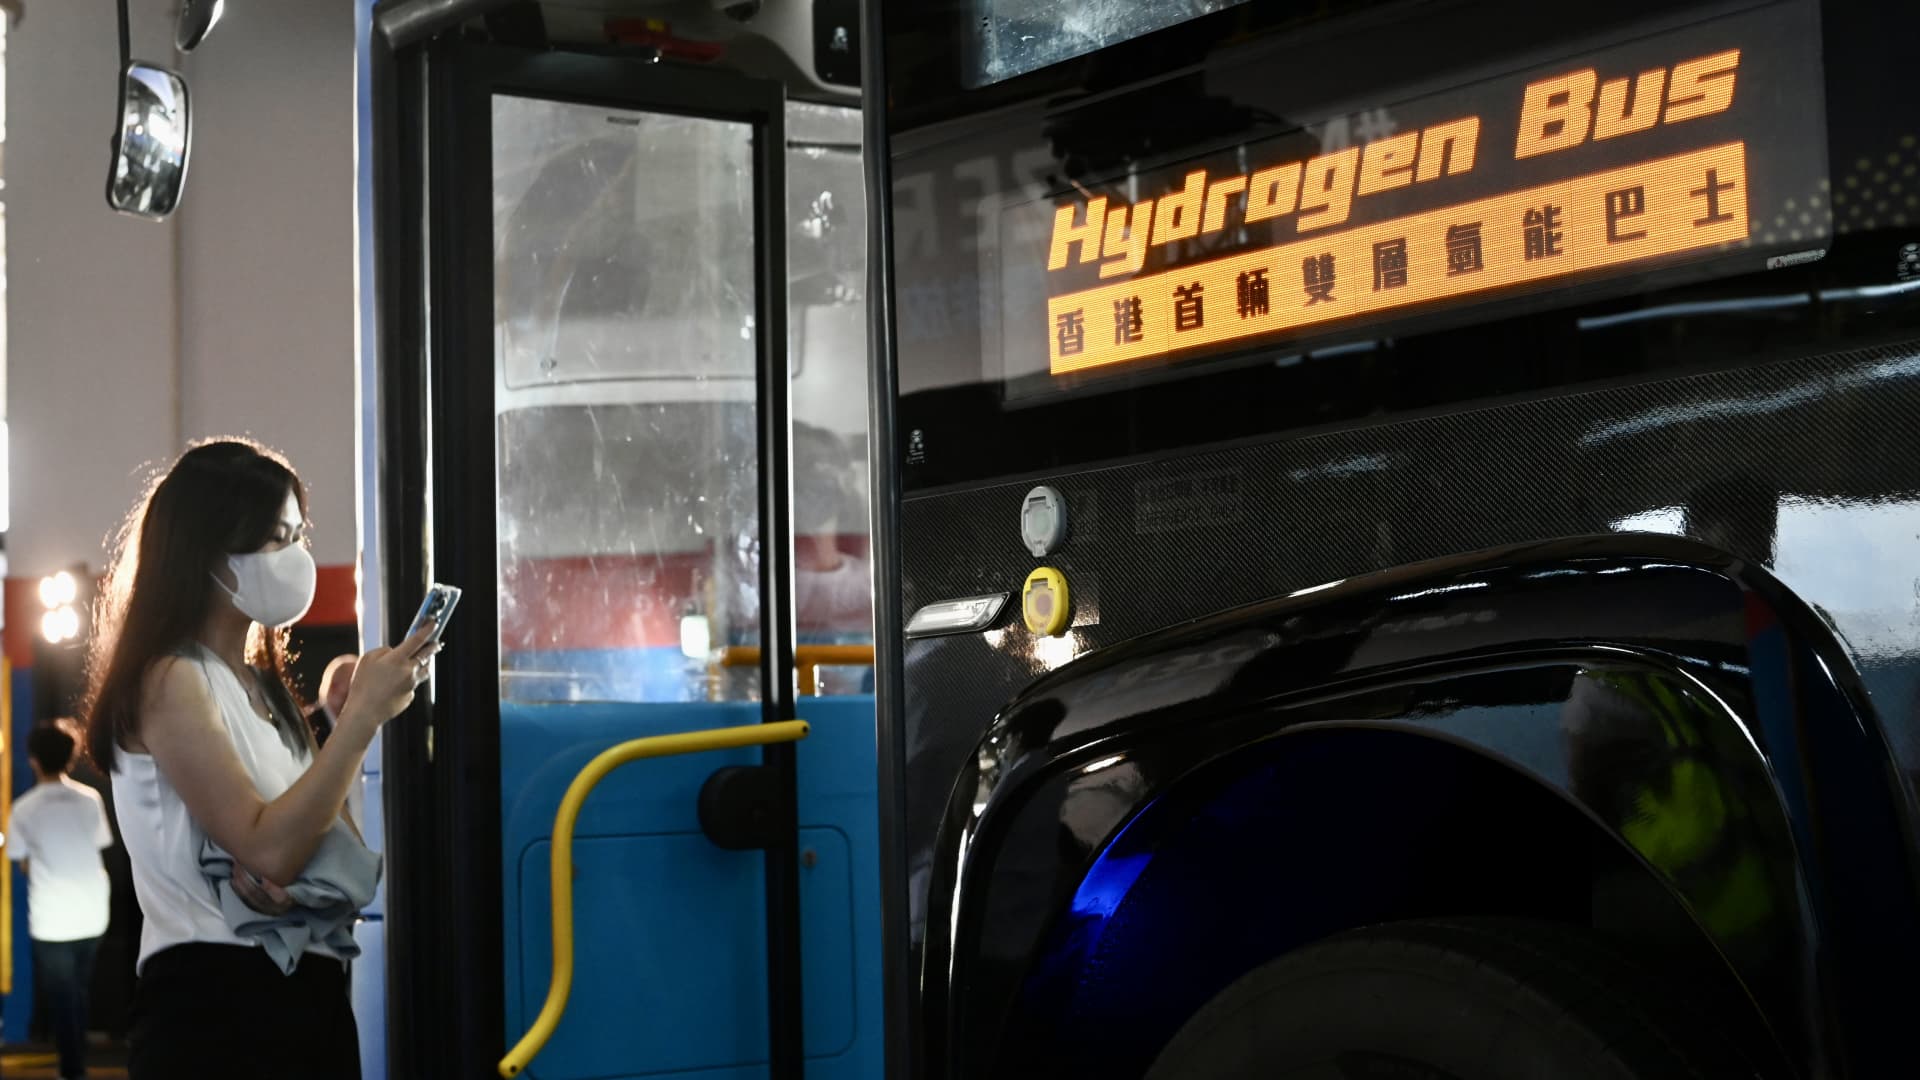 China and India could become clean hydrogen leaders — but the industry has a long way to go, says CSIS